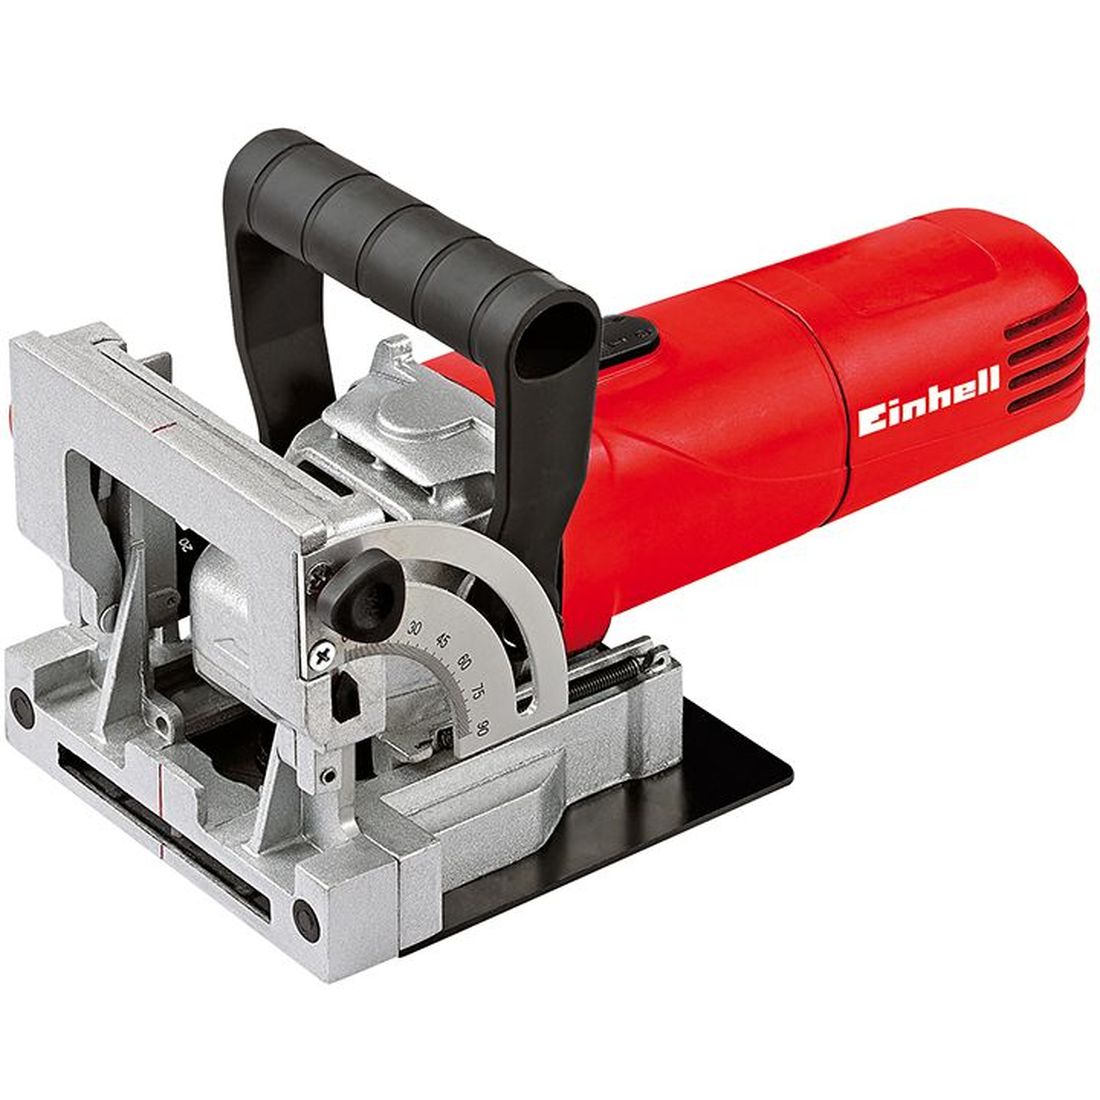 Einhell TC-BJ 900 Biscuit Jointer 860W 240V                                             